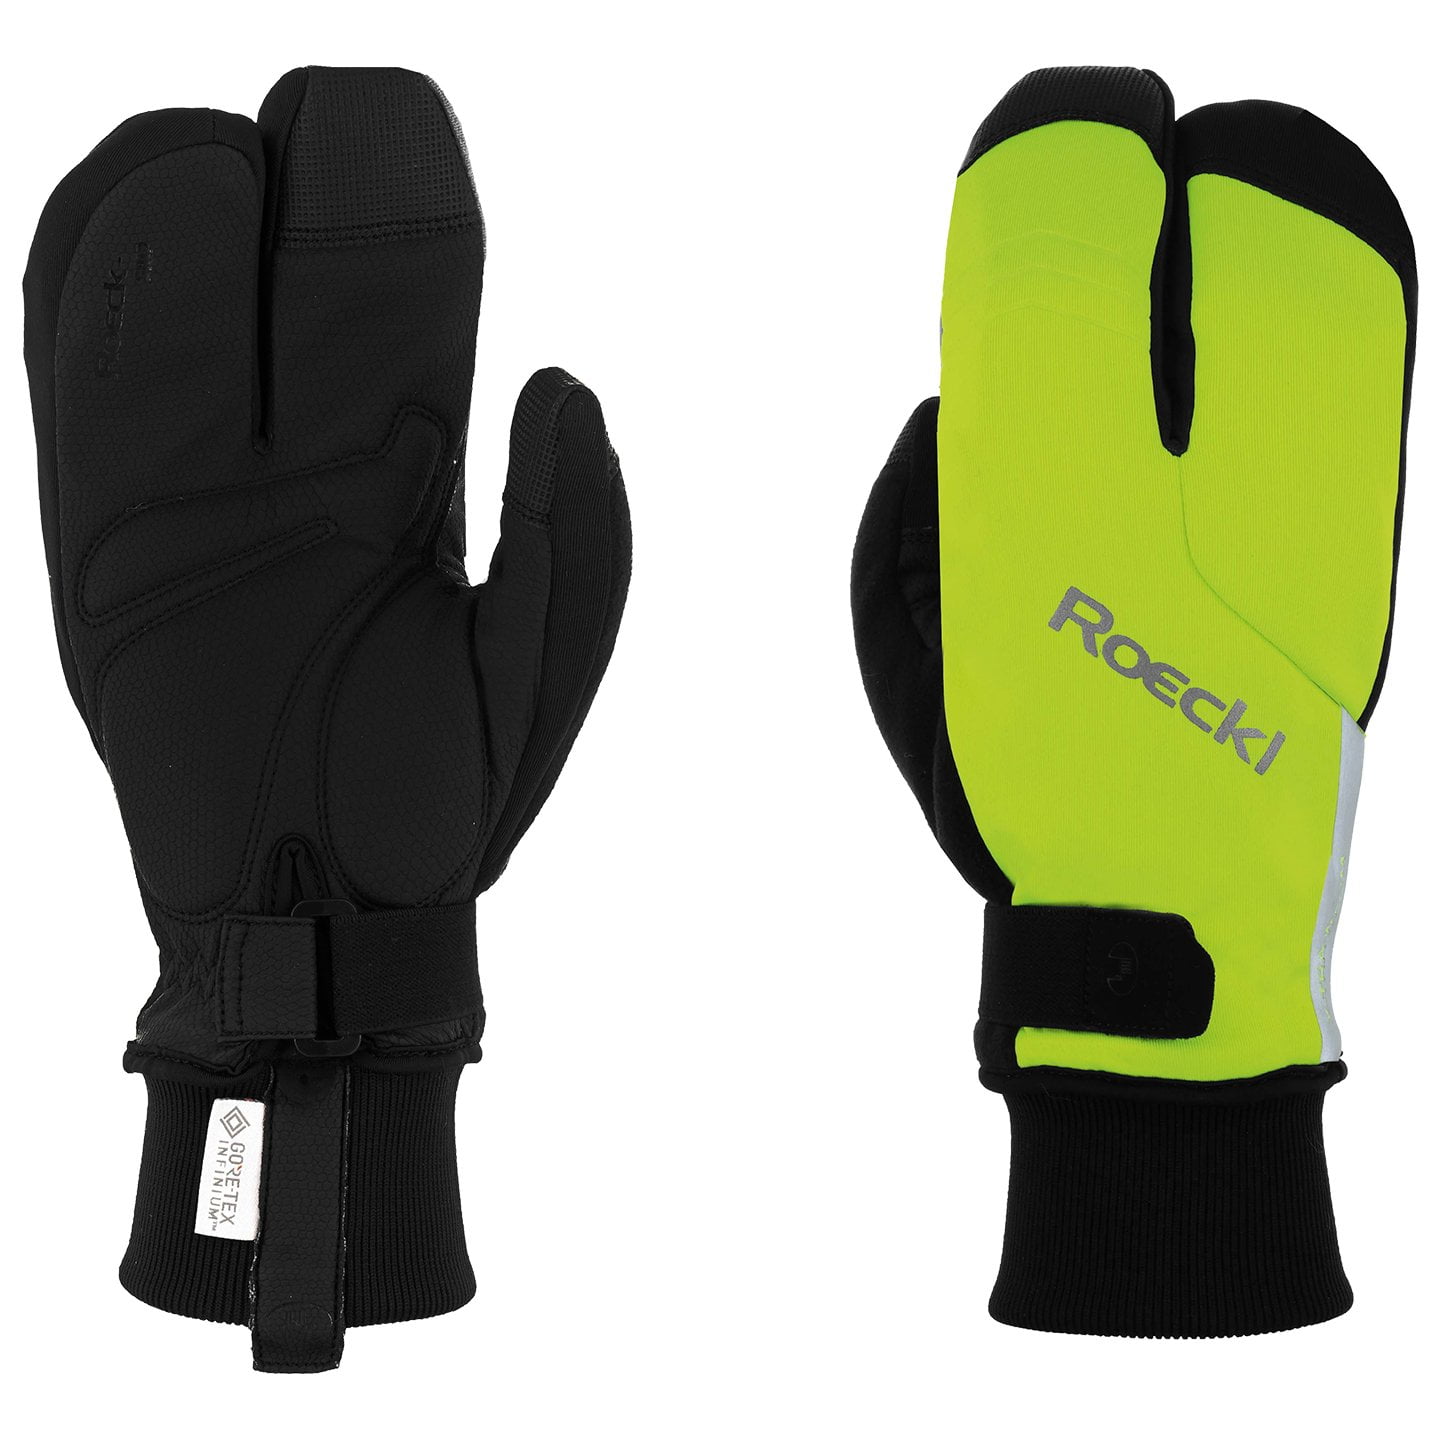 ROECKL Villach 2 Lobster Winter Gloves Winter Cycling Gloves, for men, size 7,5, MTB gloves, MTB clothing